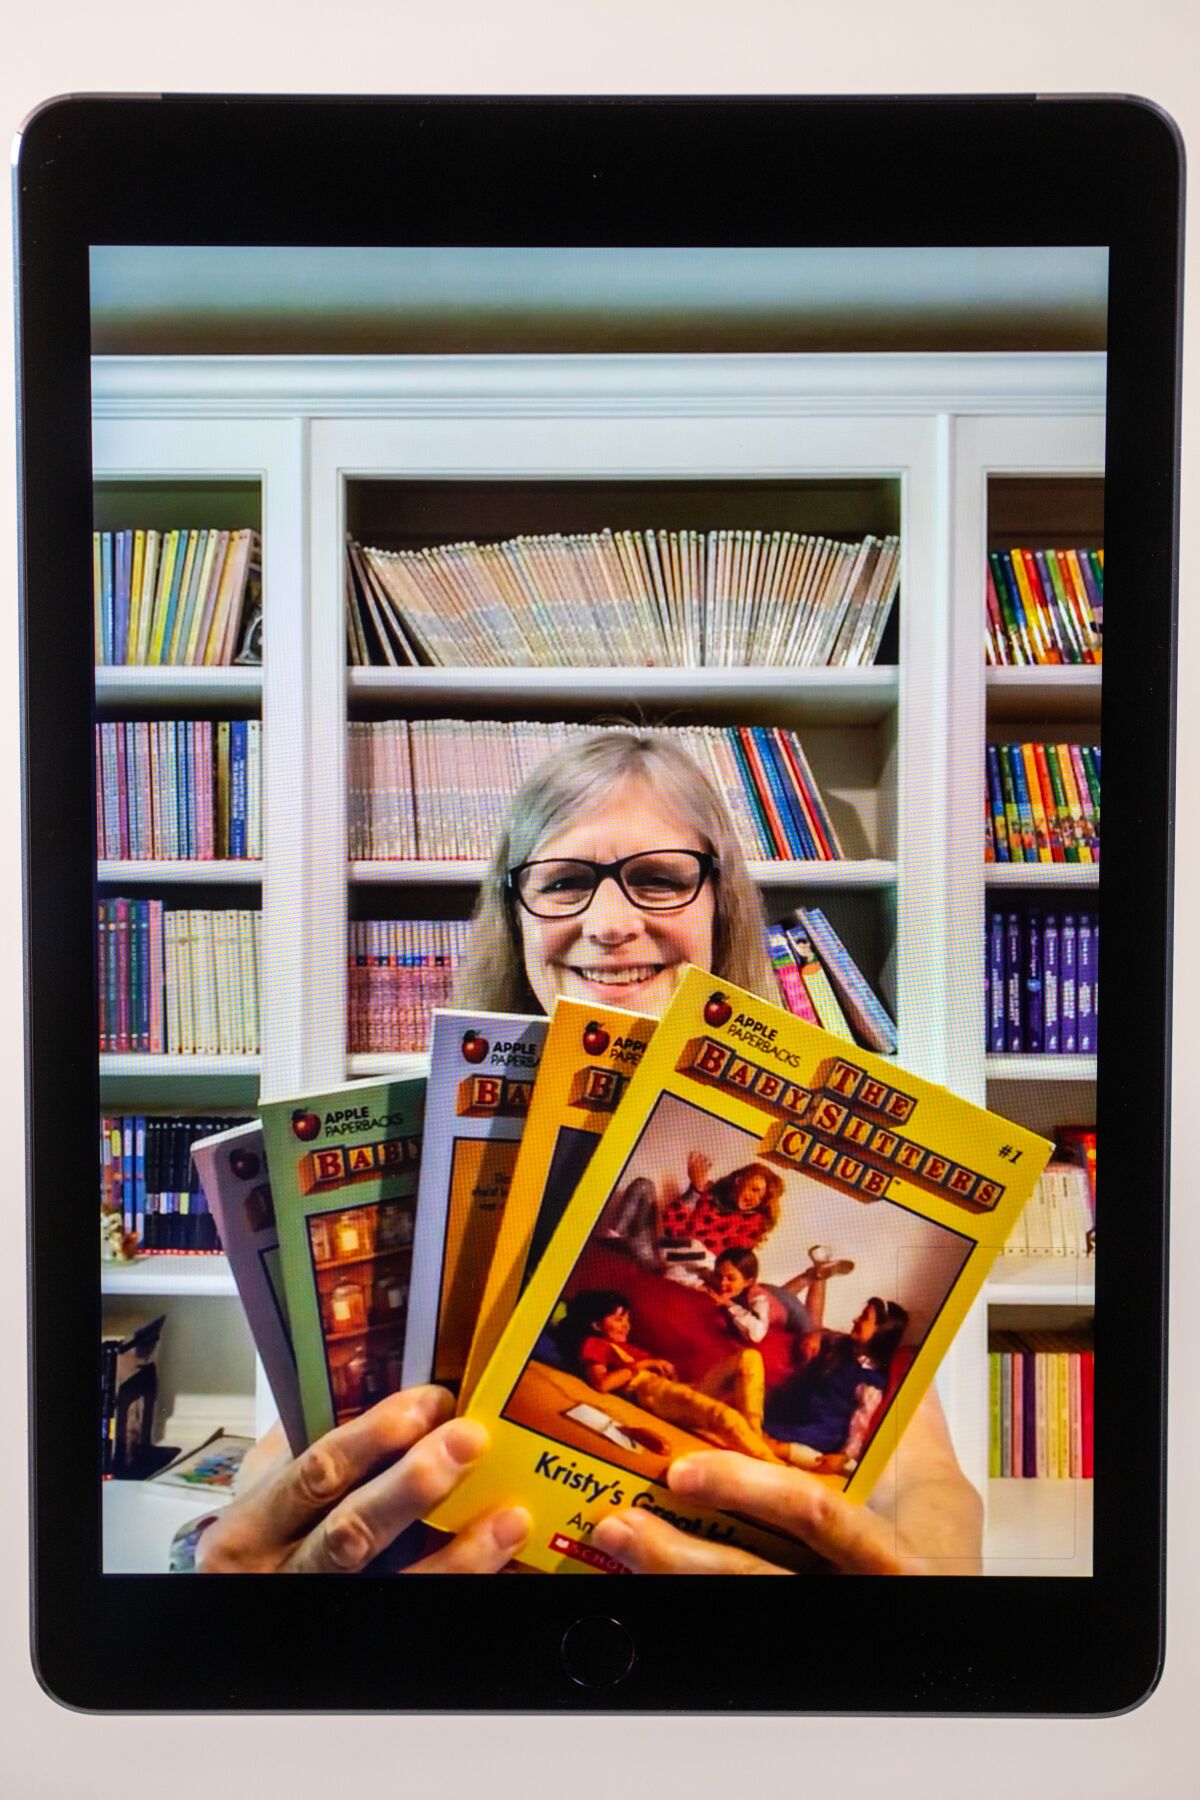 Ann M. Martin, author of the famed book series "The Baby-Sitters Club," is photographed at her Woodstock, N.Y., home.